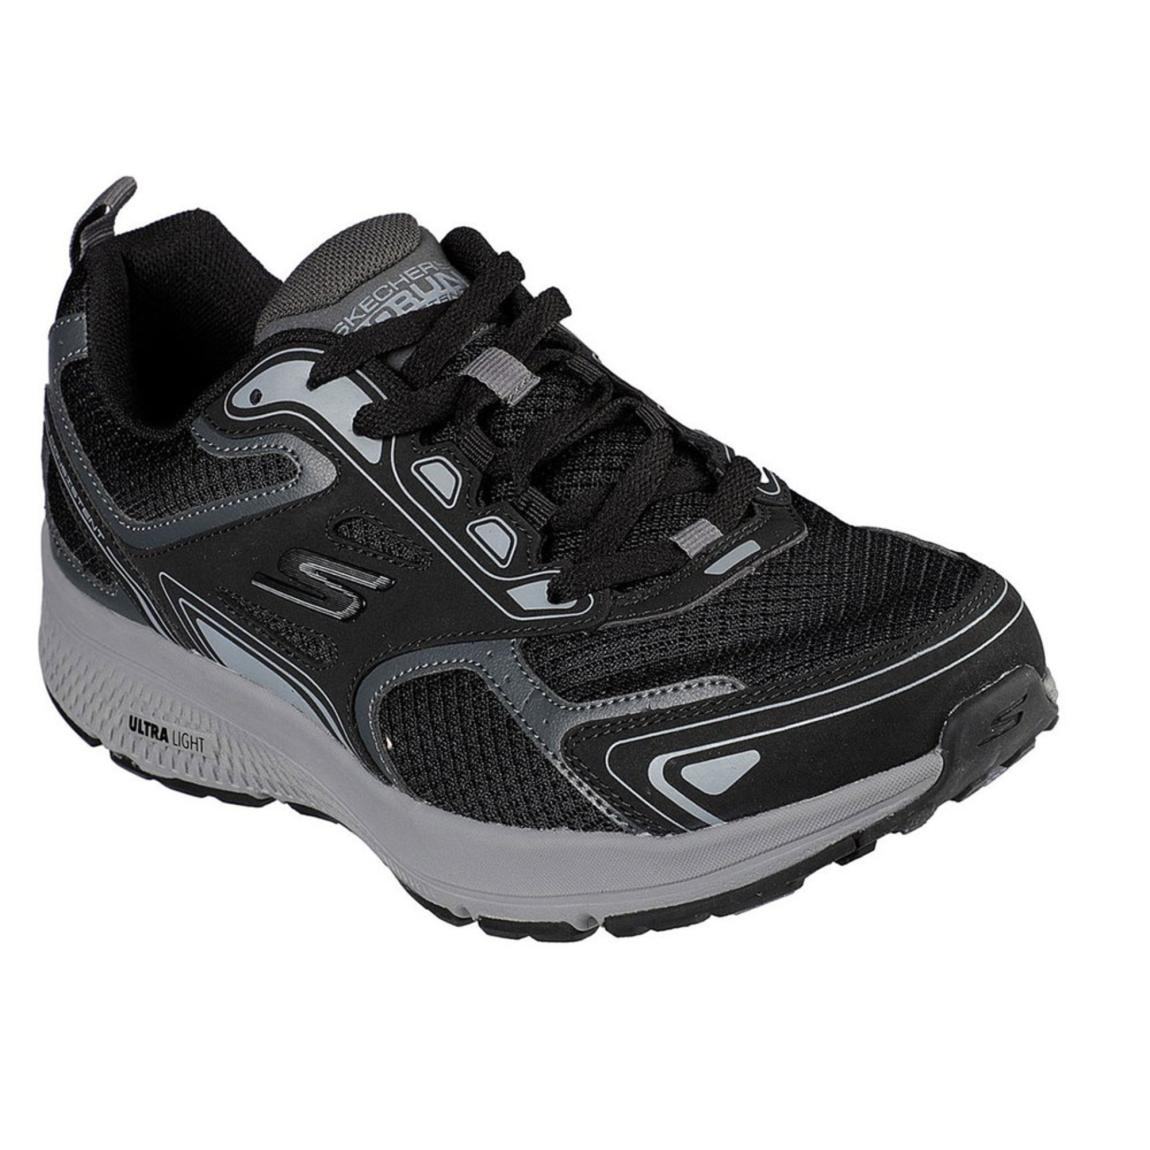 What Are The Key Factors To Consider When Choosing Running Shoes For Different Activities?